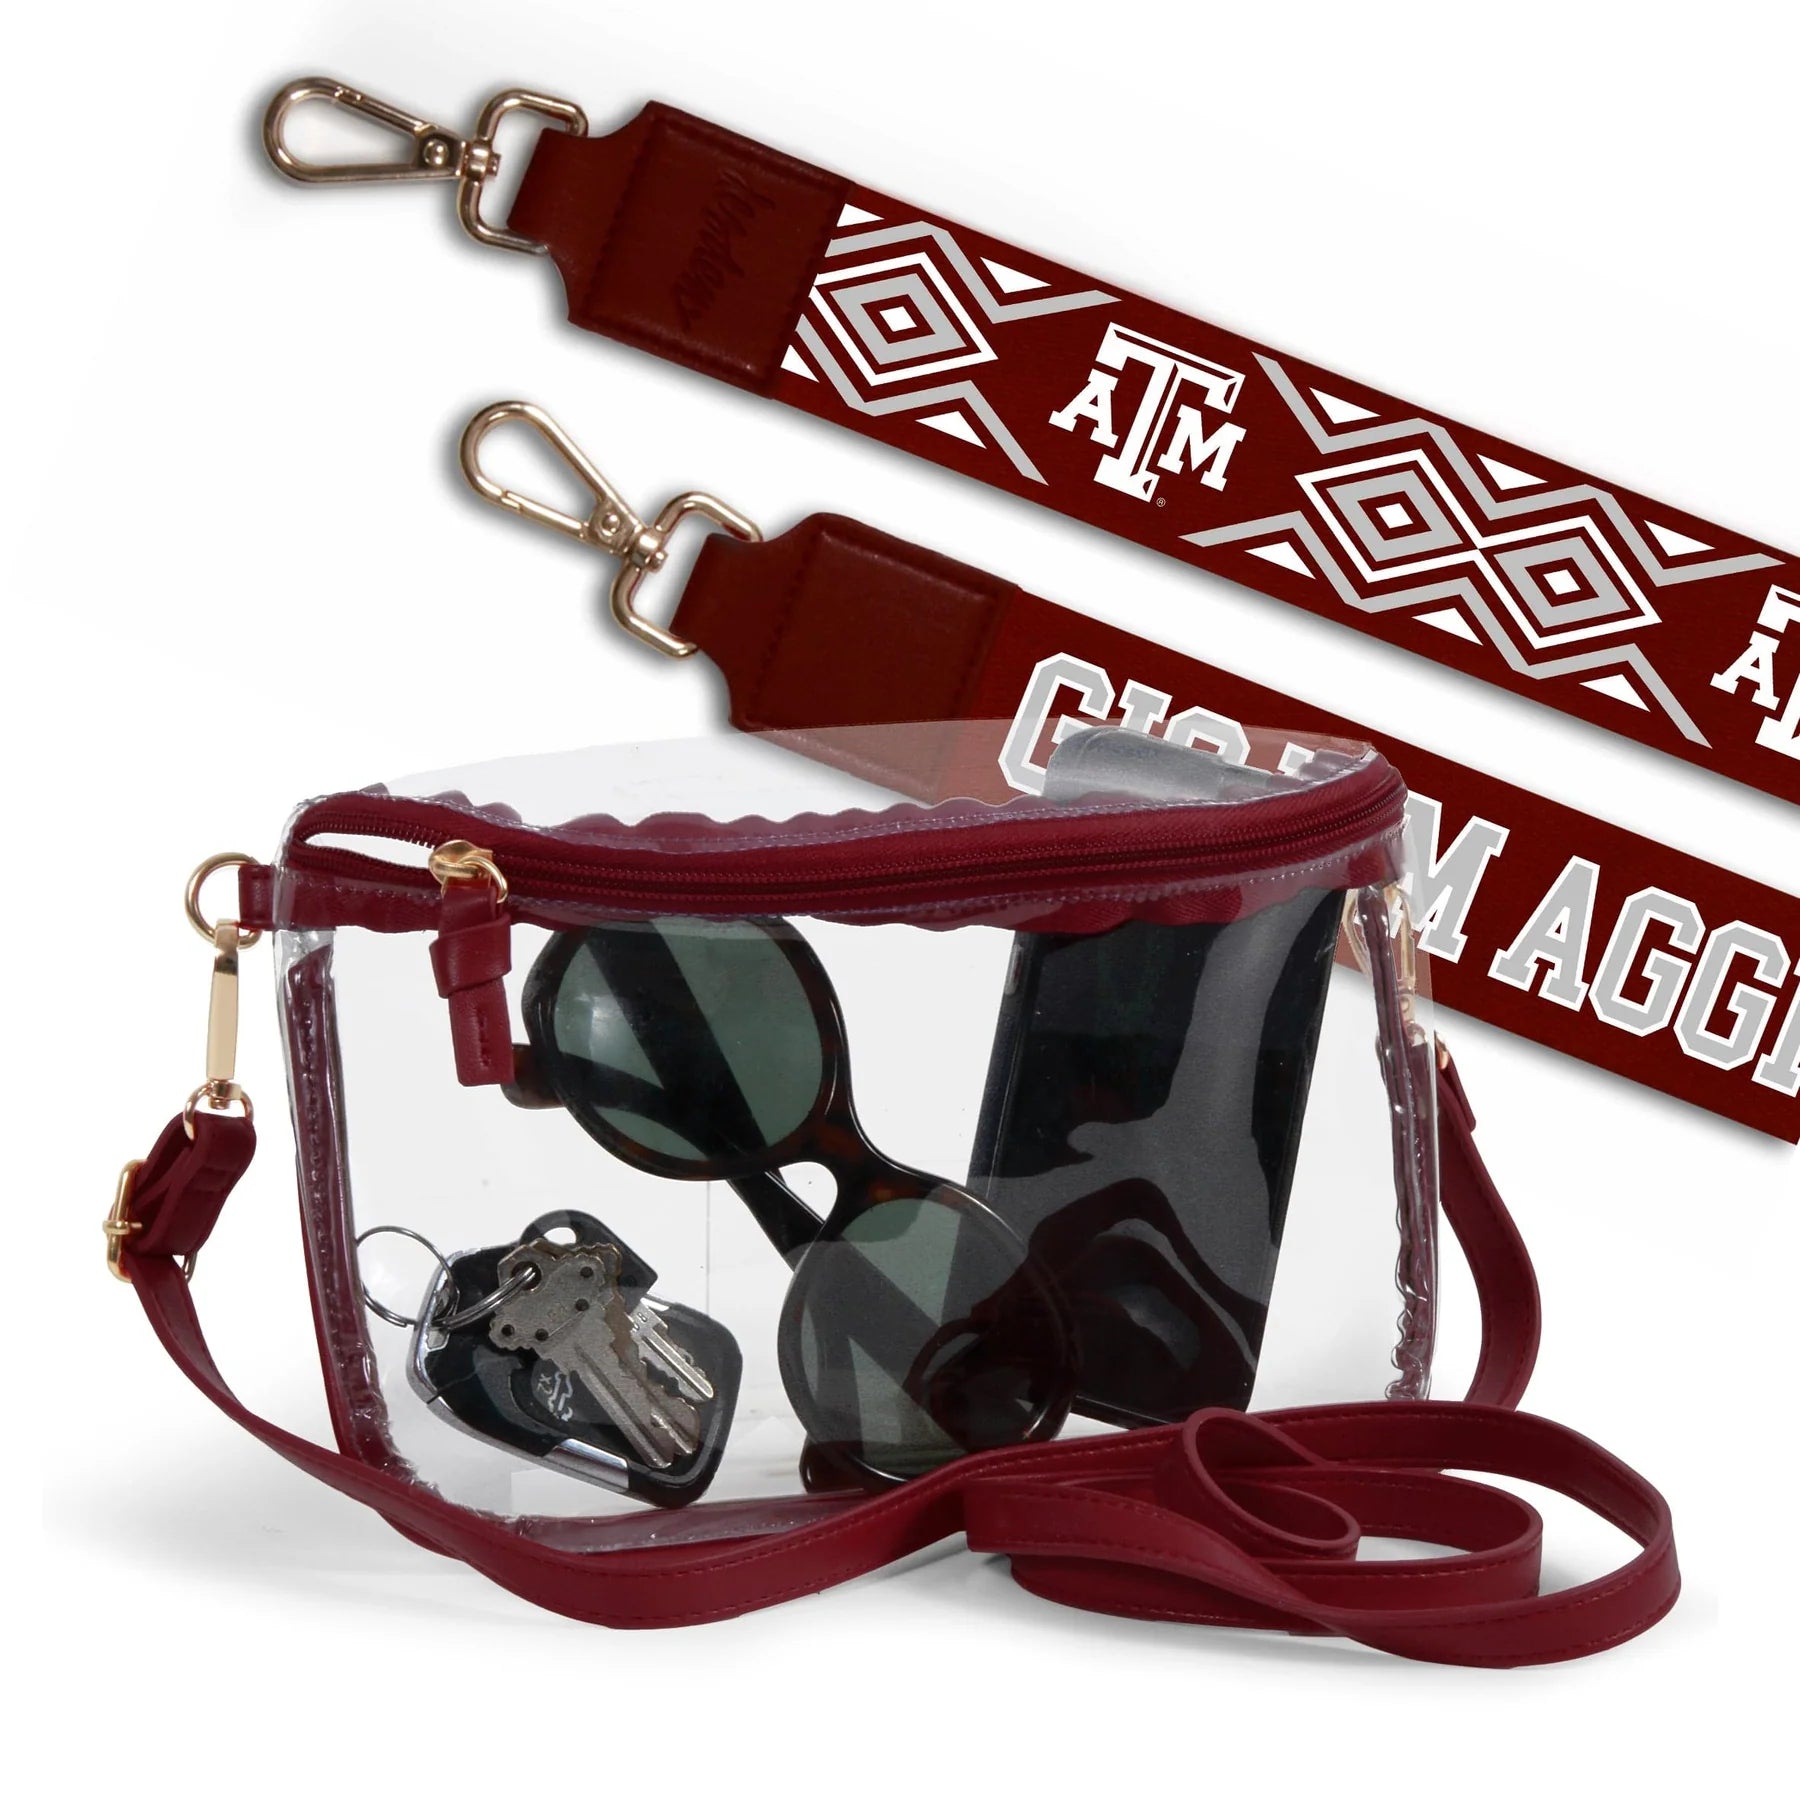 Lexi Clear Purse And Patterned Strap A&M